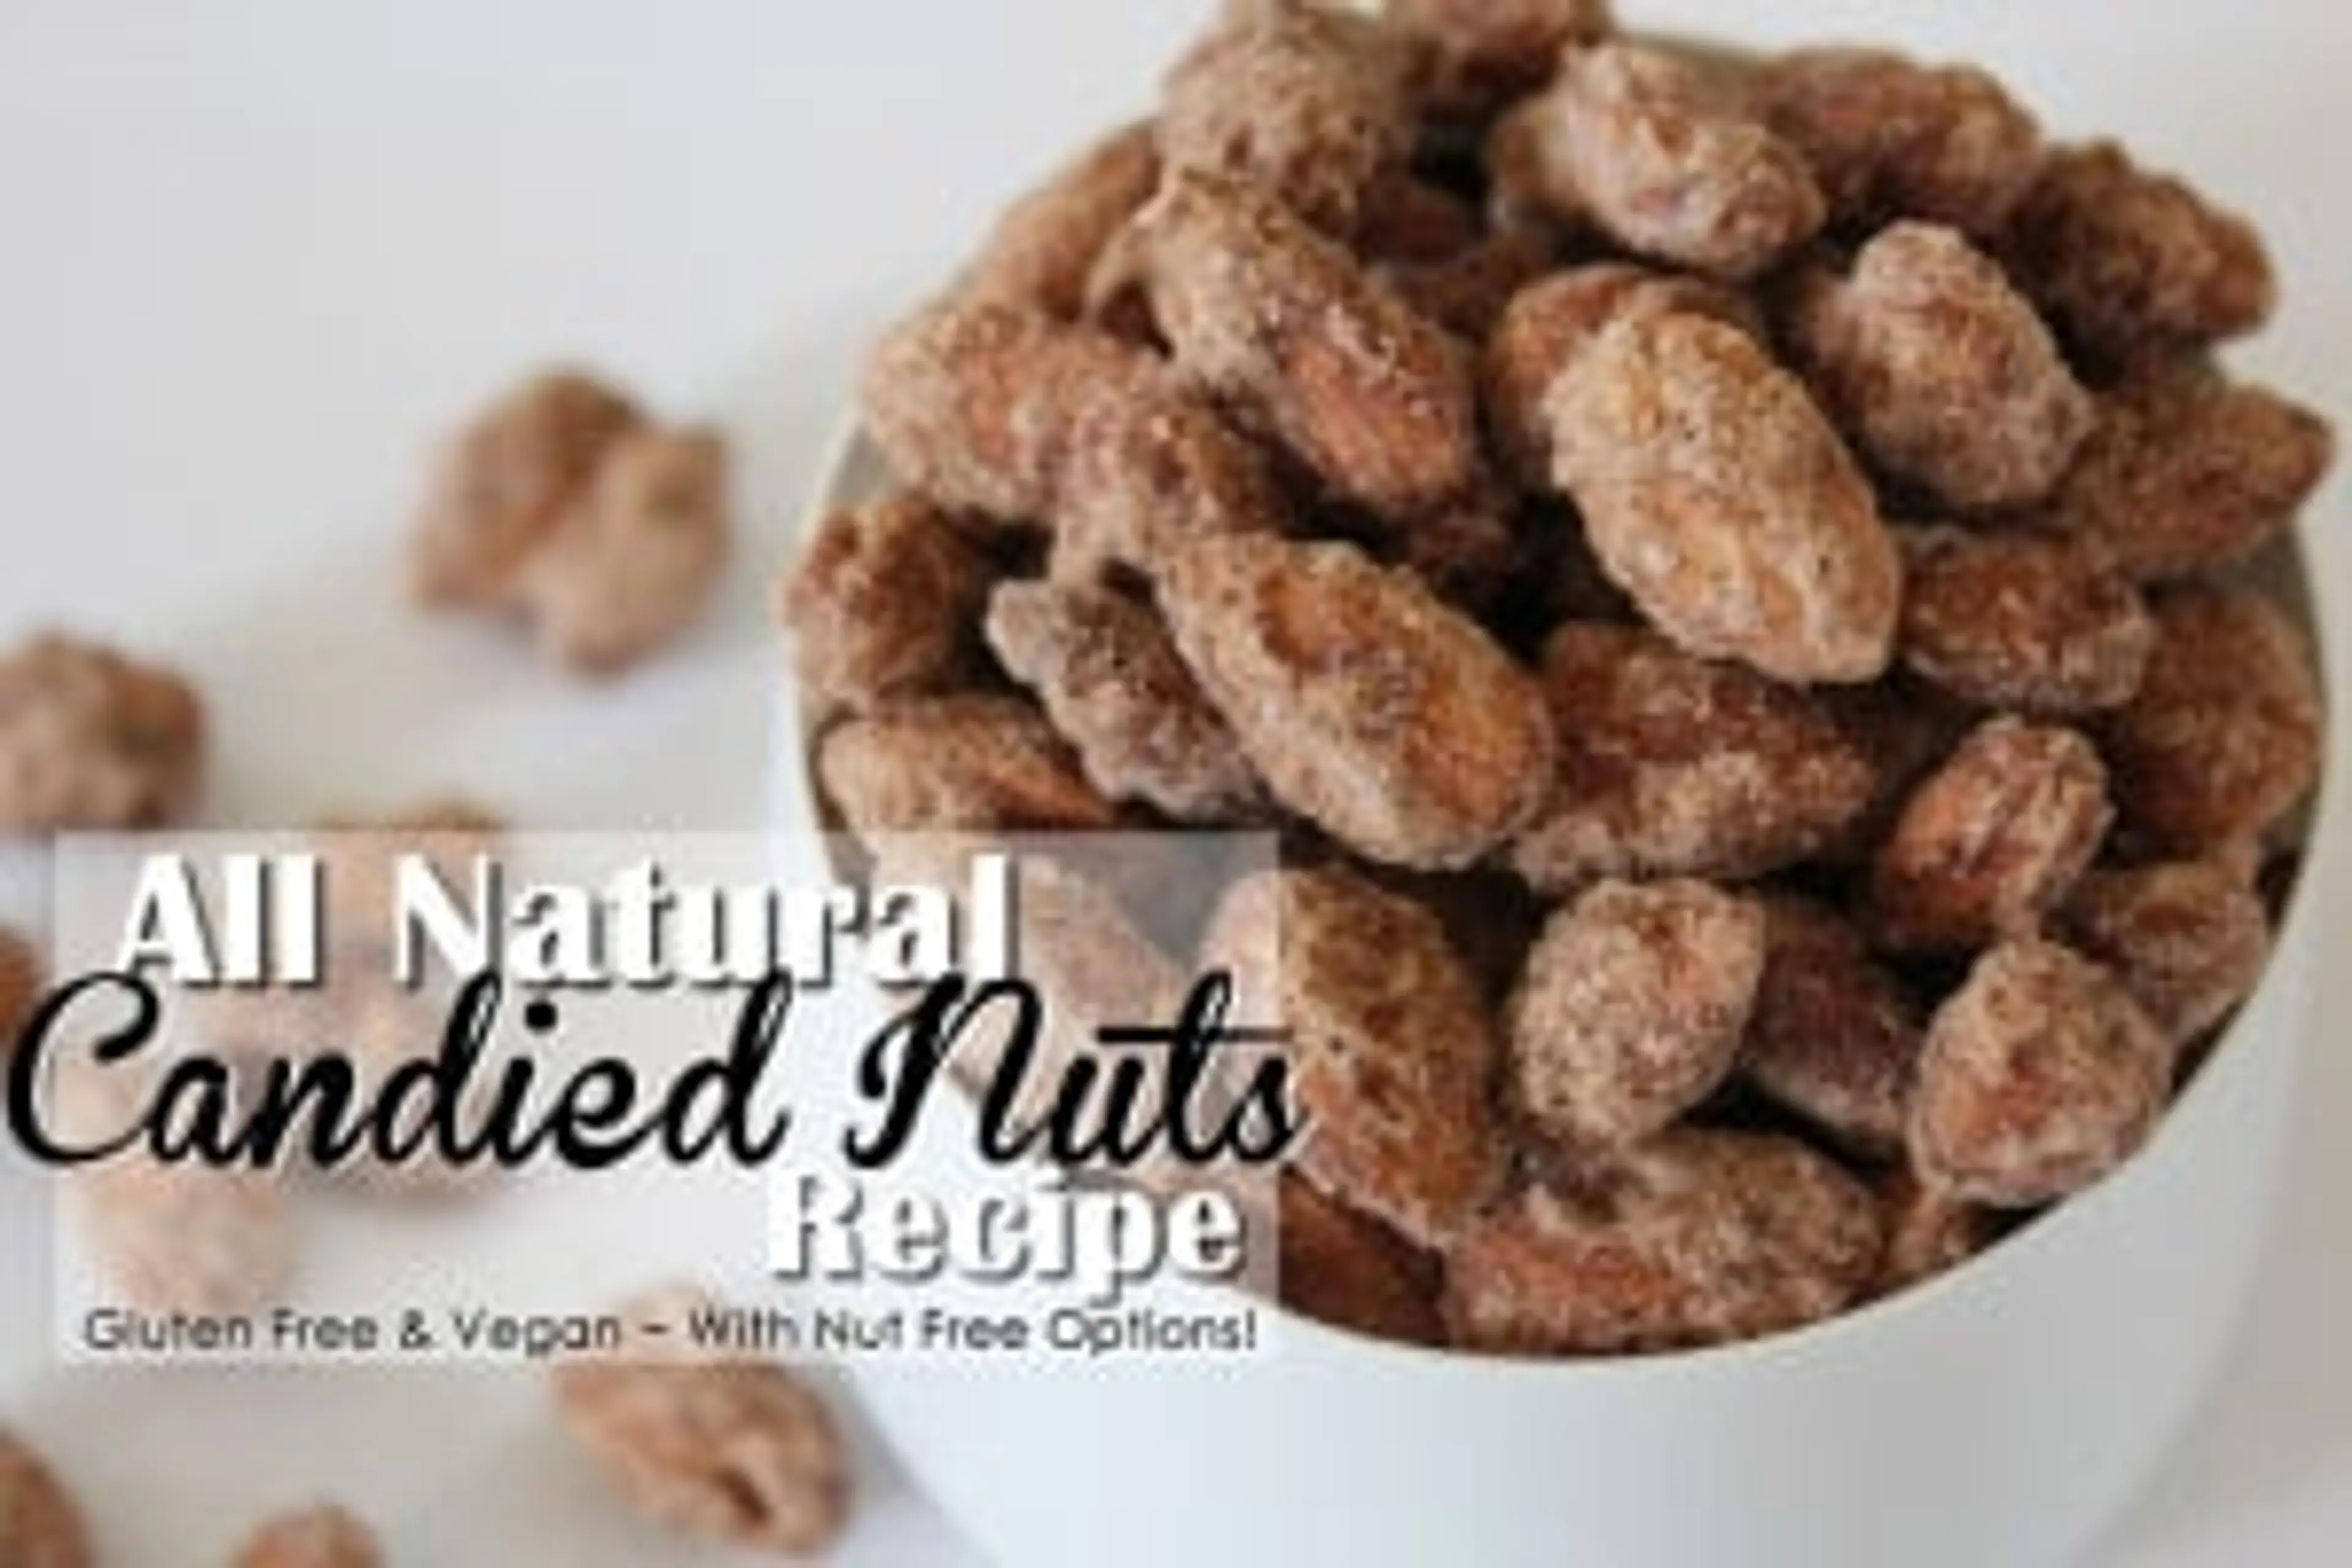 The BEST Candied Nuts Recipe